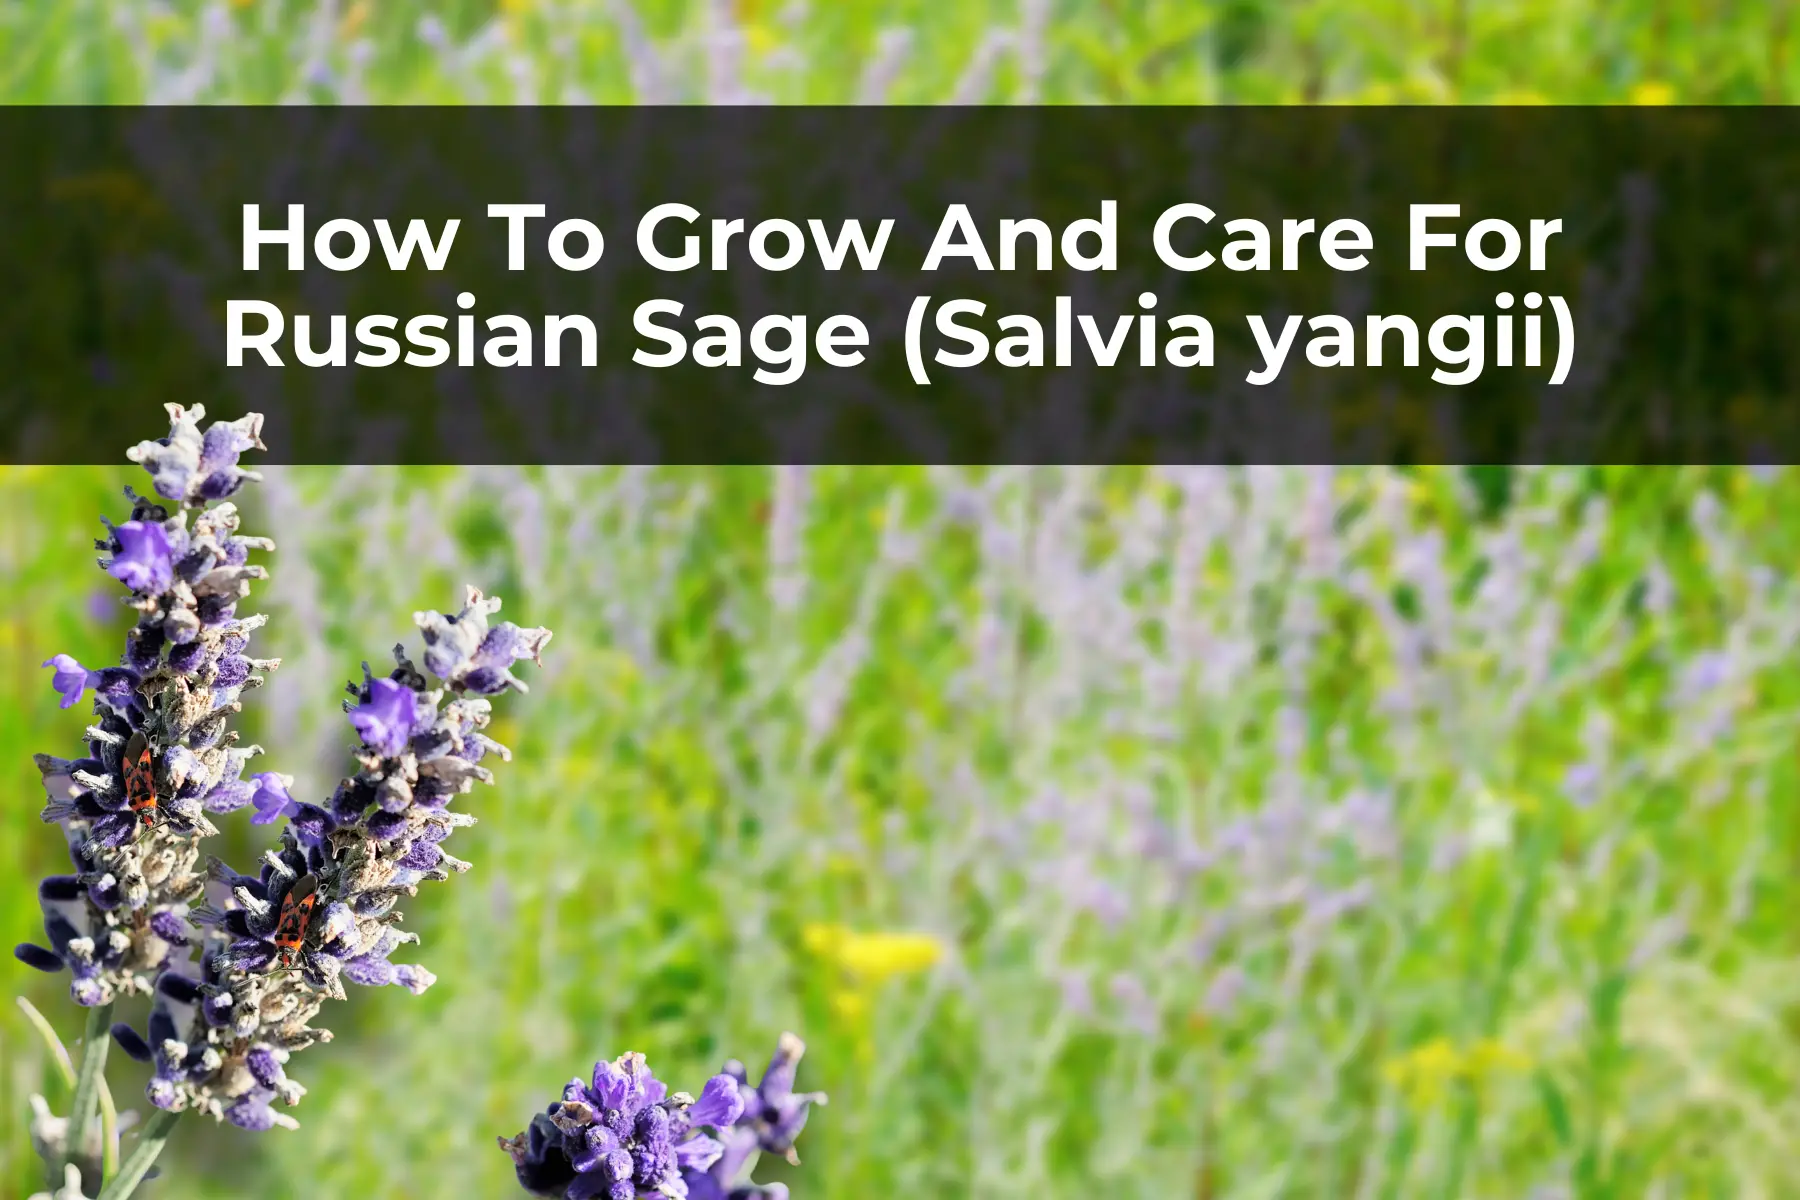 How To Grow And Care For Russian Sage (Salvia yangii)